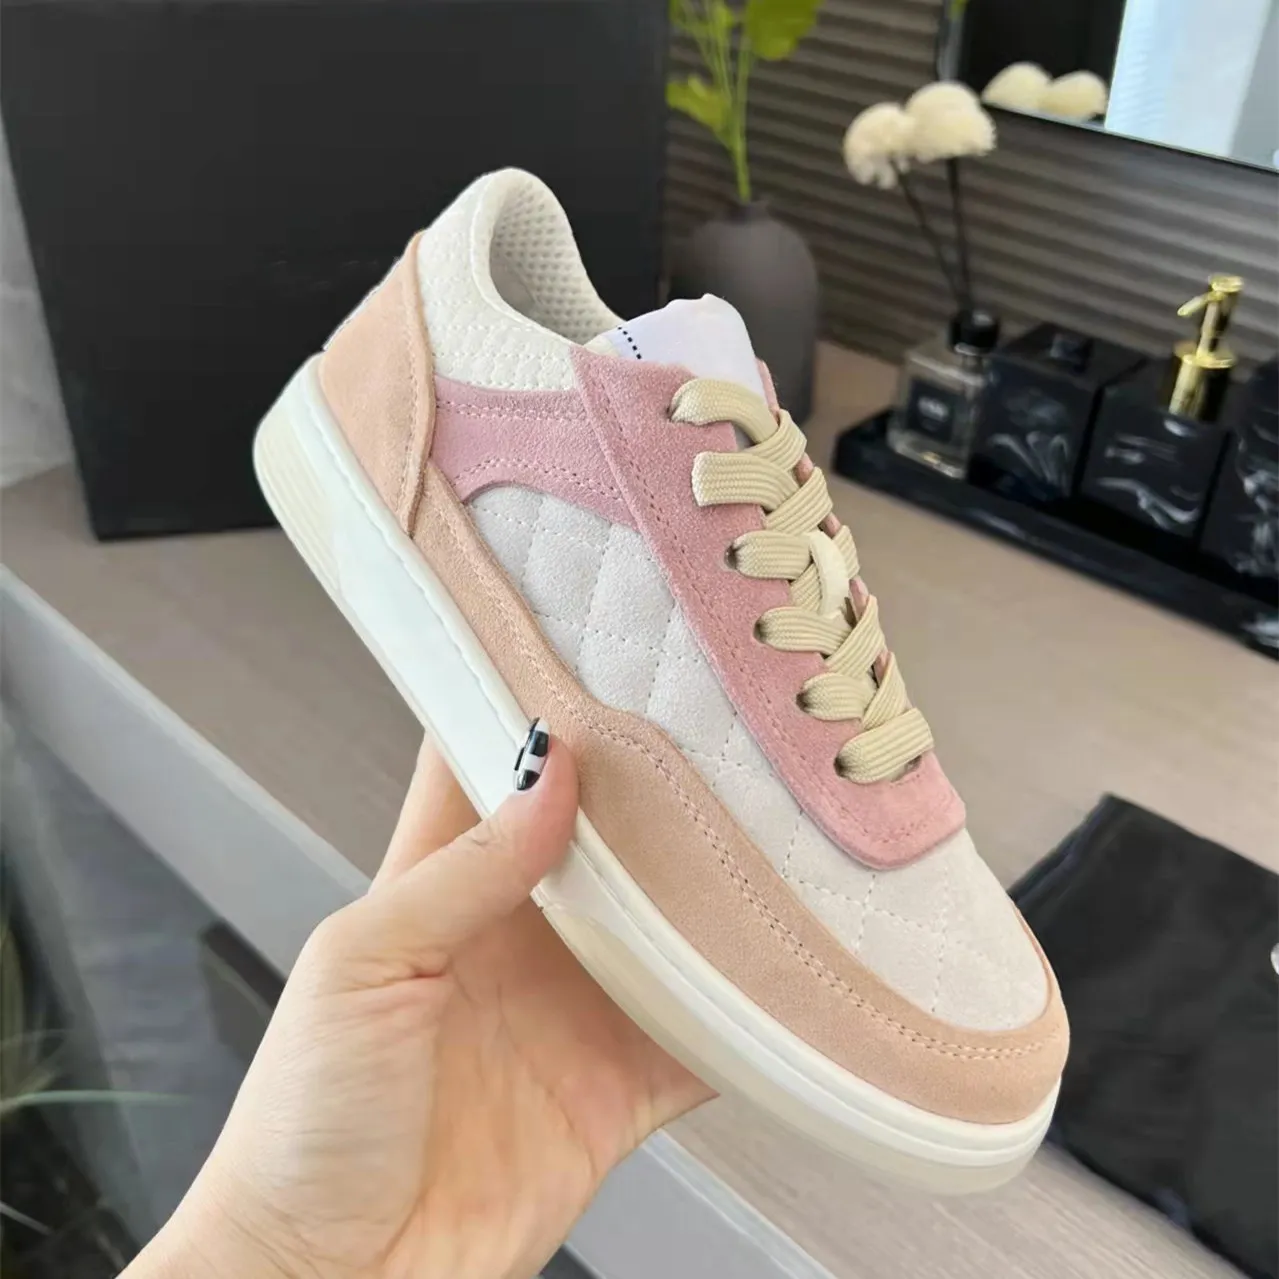 2022Autum Lastest Women Casual Shoes Top Quality Patchwork Color Lace Up Flat Soled Board Leisure Platform Sneakers Outdoor Fash